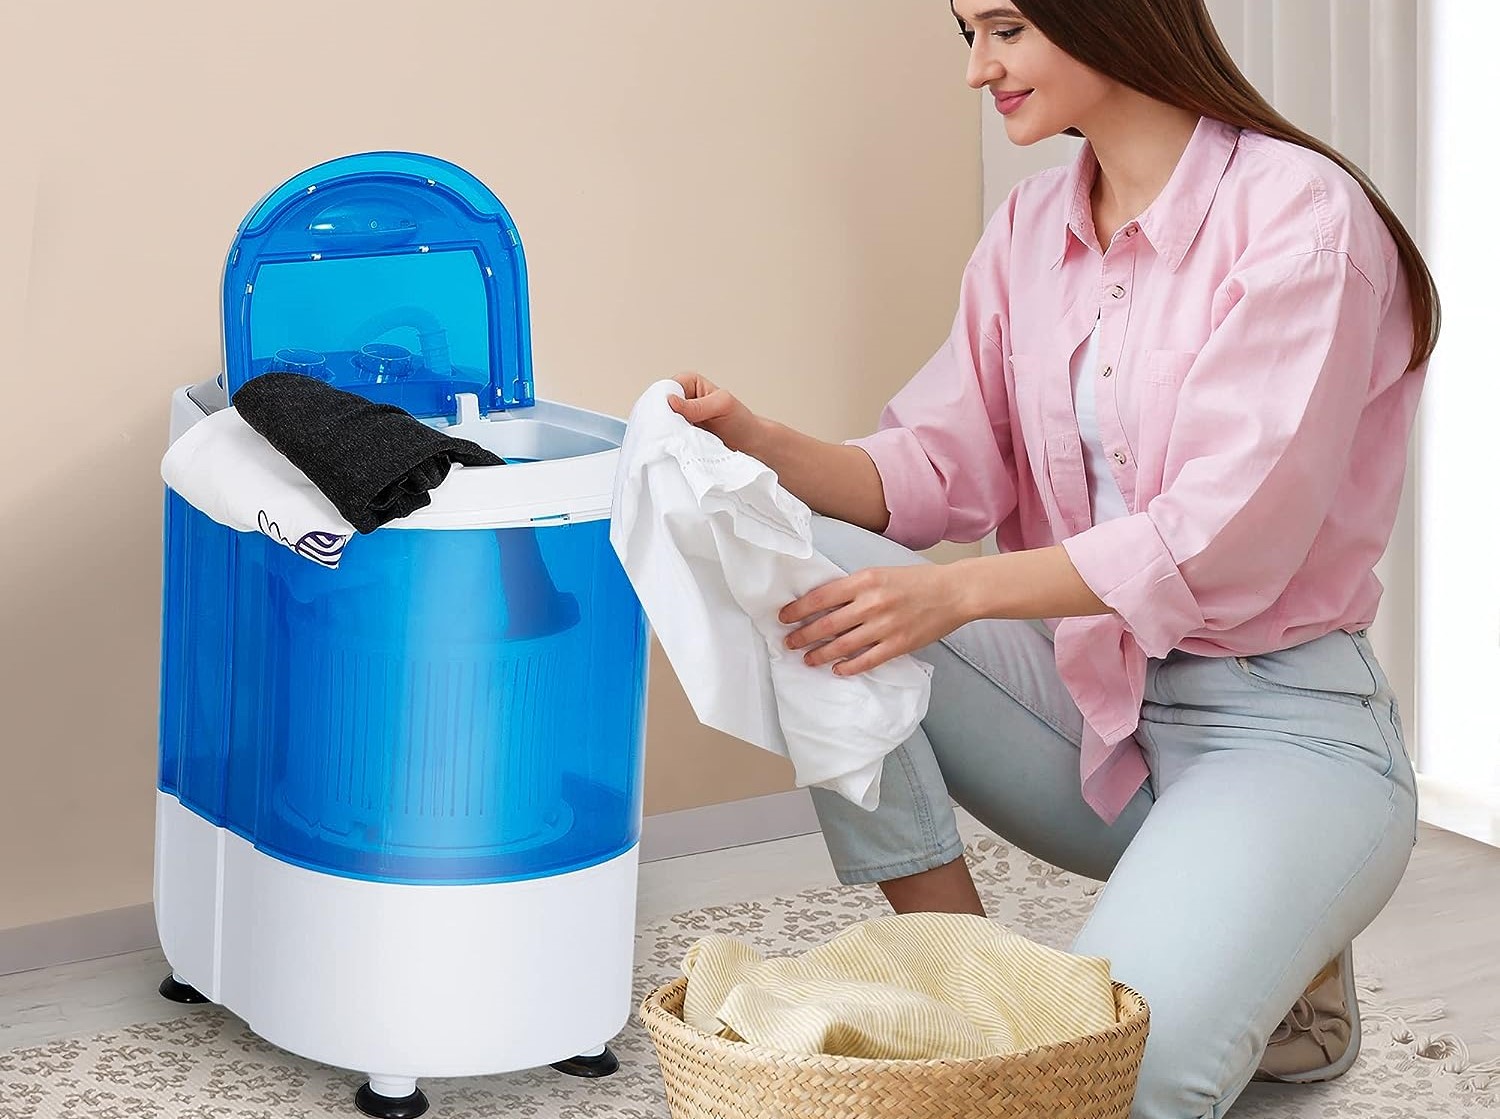 COMFEE’ Washing Machine, 1.8 Cu.Ft LED Portable Washing Machine and Compact Washer, HYGIENE+ Deep Clean, Environmentally Friendly, Child Lock for RV